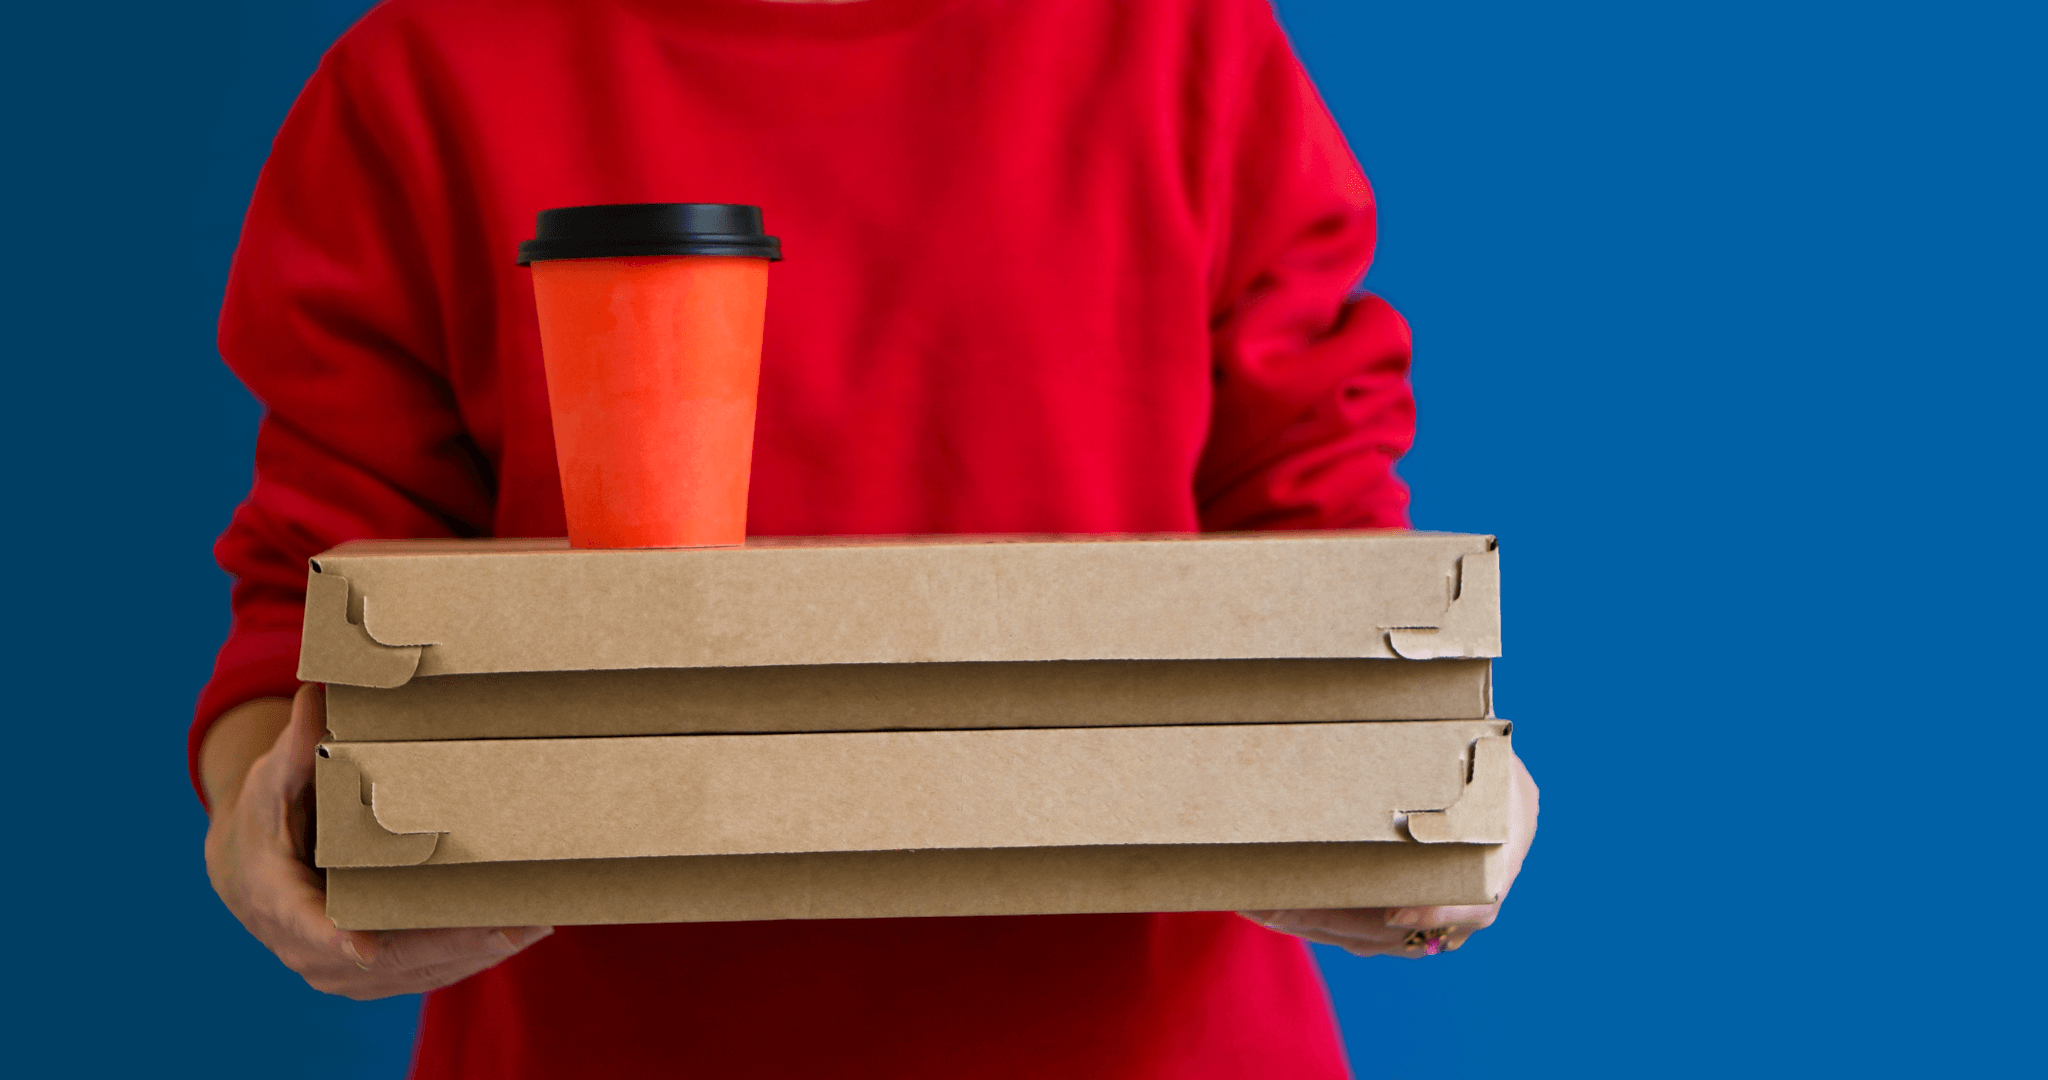 staff member holding two pizza boxes and a hot drink